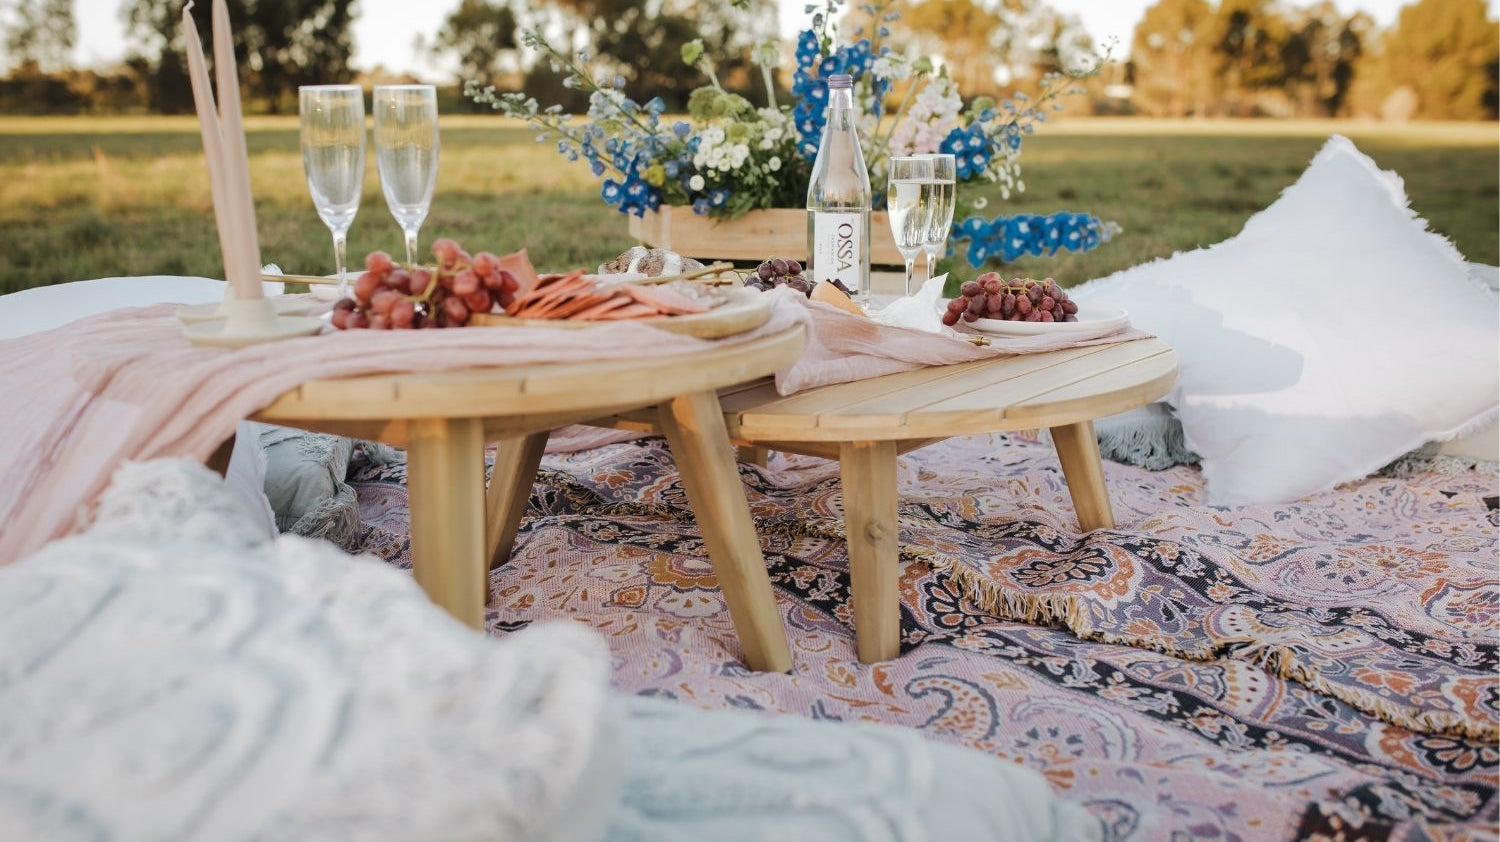 How To Host The Ultimate Boho Picnic Soiree - Isla In Bloom